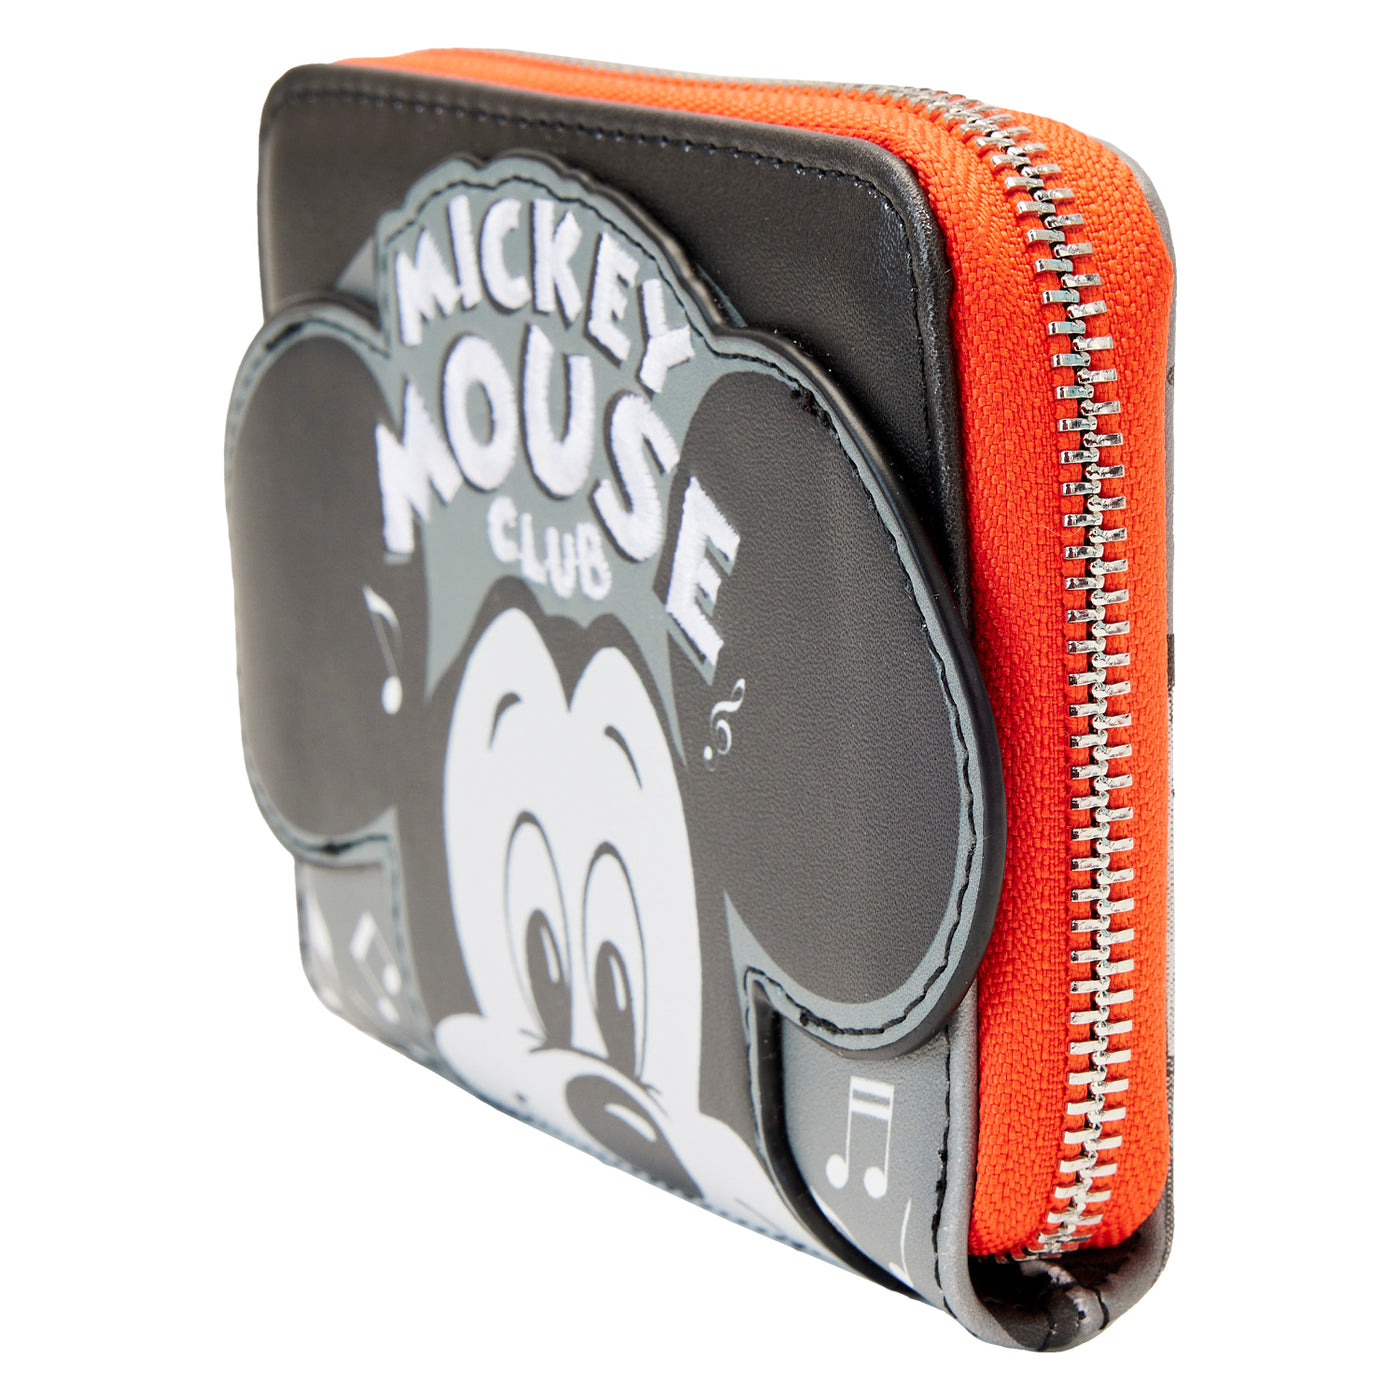 Disney 100th Anniversary Mickey Mouse Club Wallet